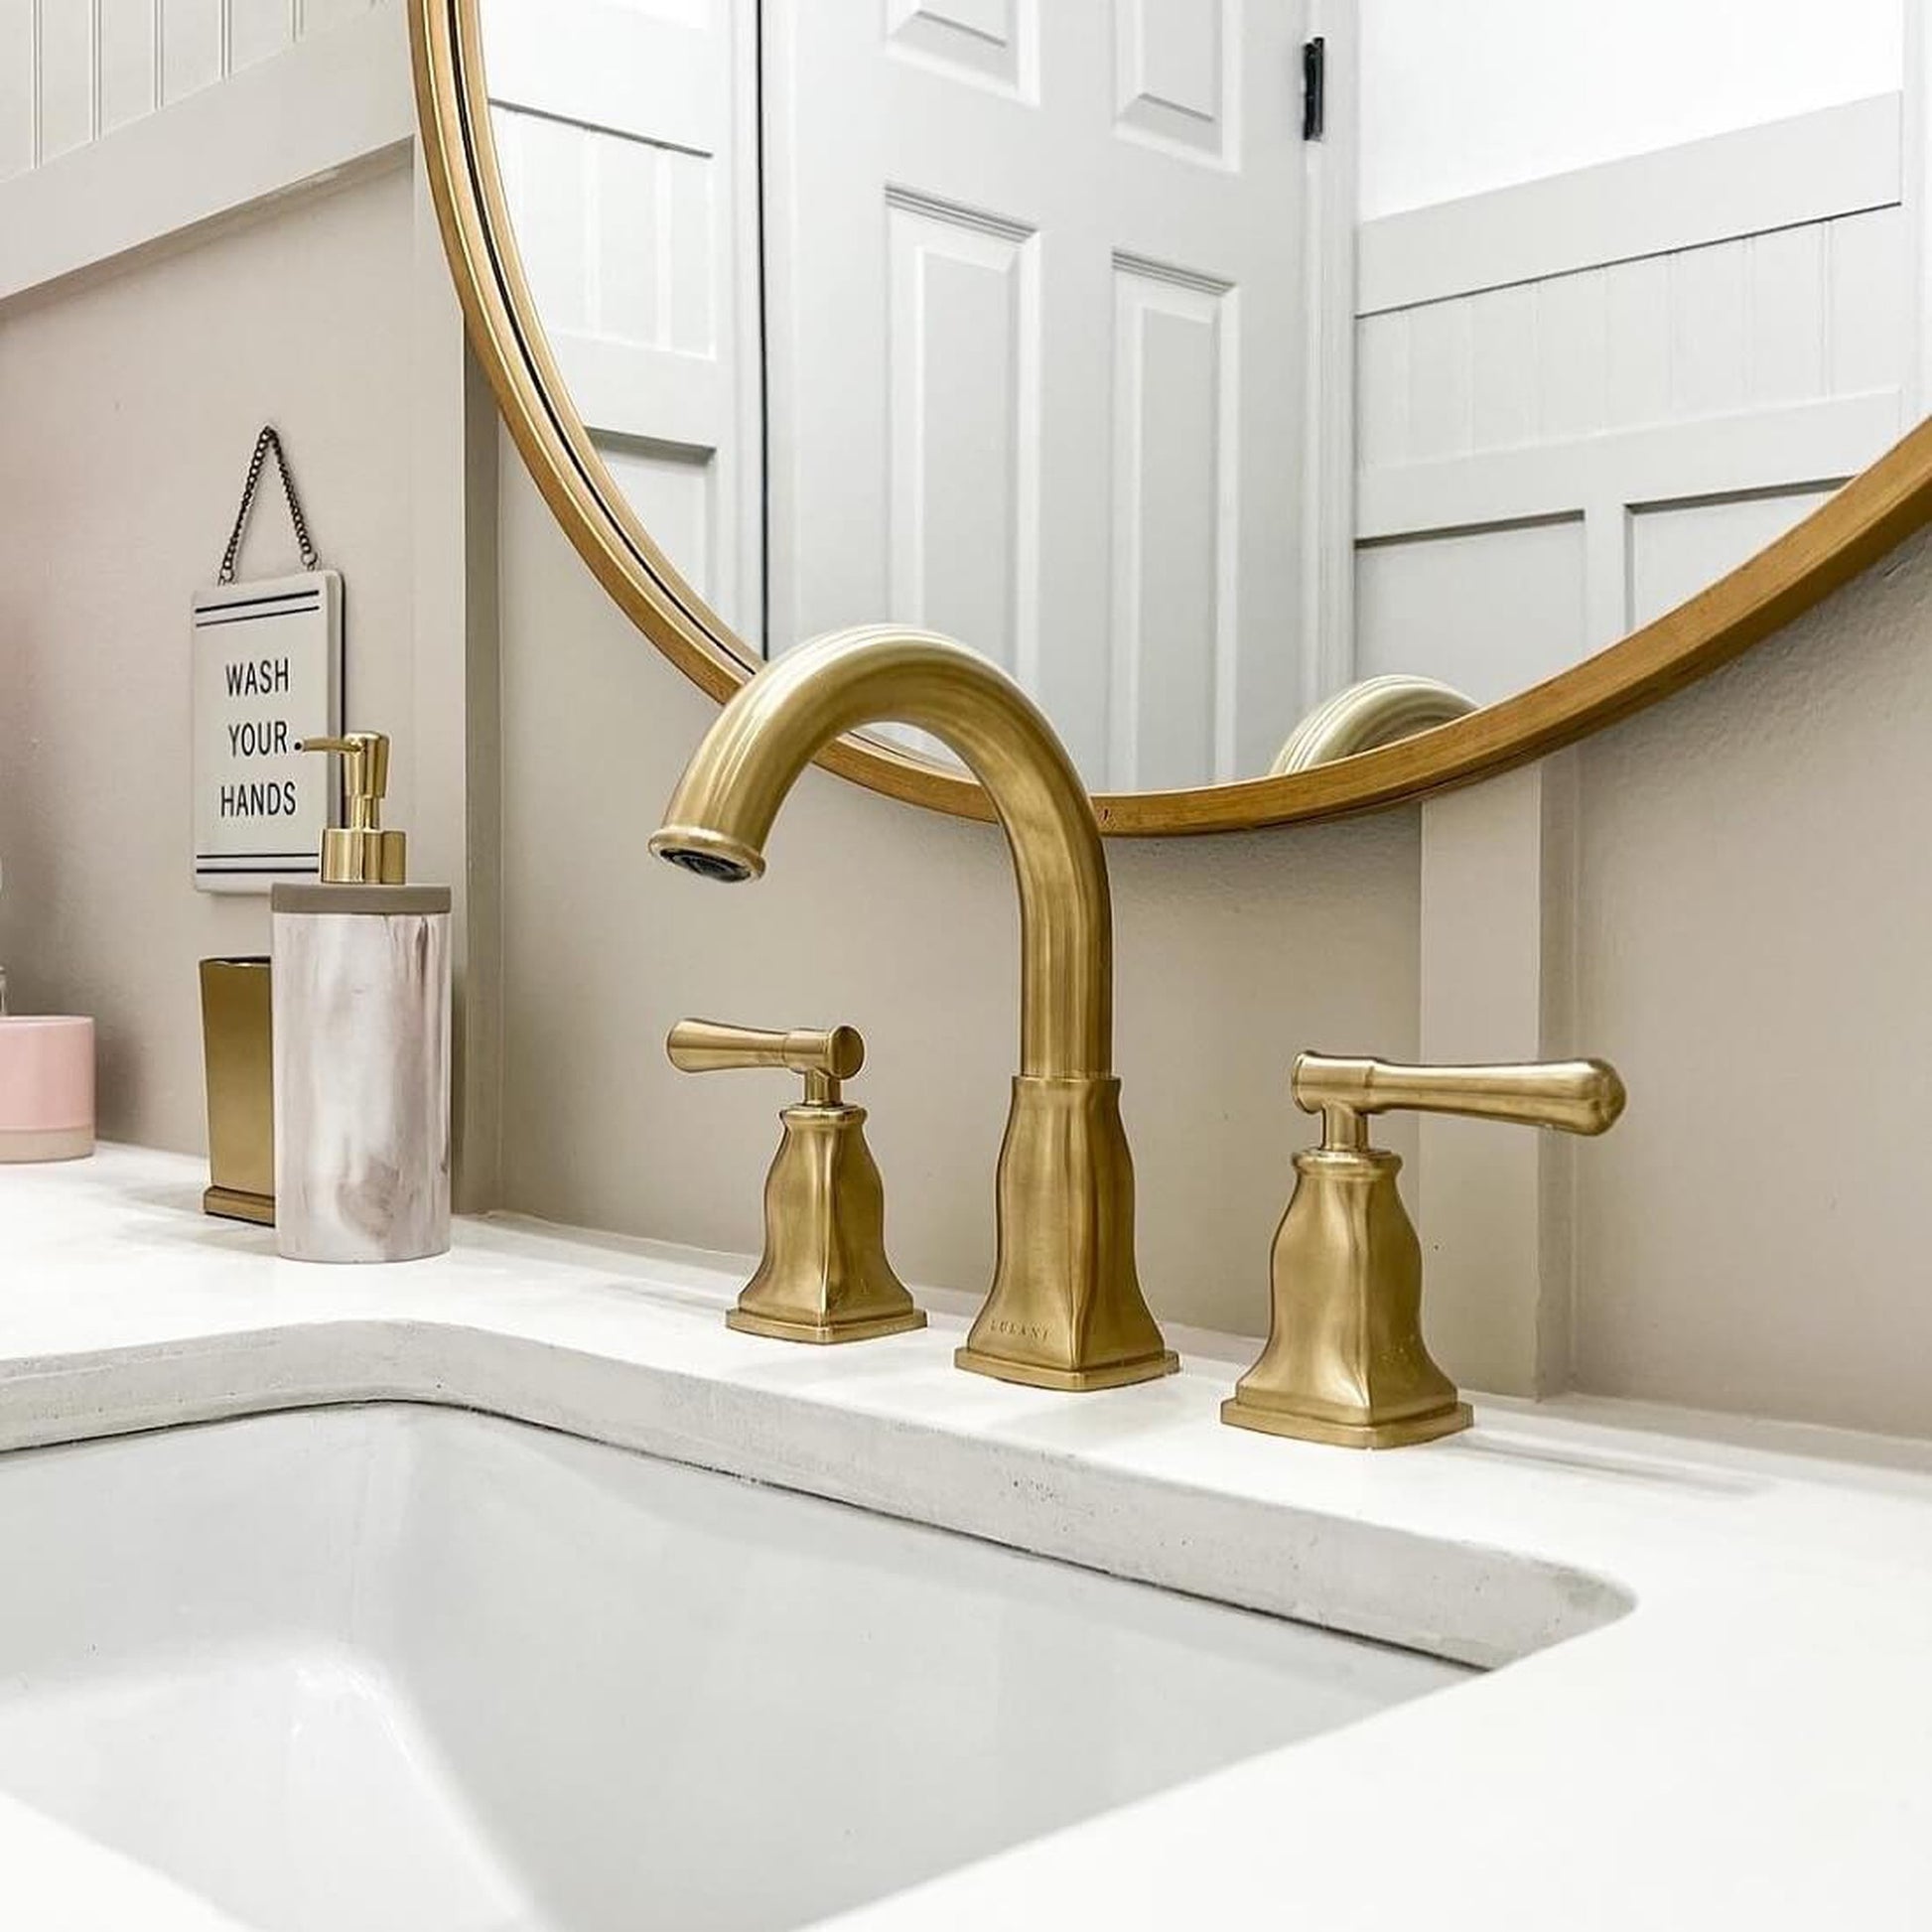 Lulani Aurora Champagne Gold 1.2 GPM Double Handle Widespread Brass Faucet With Drain Assembly